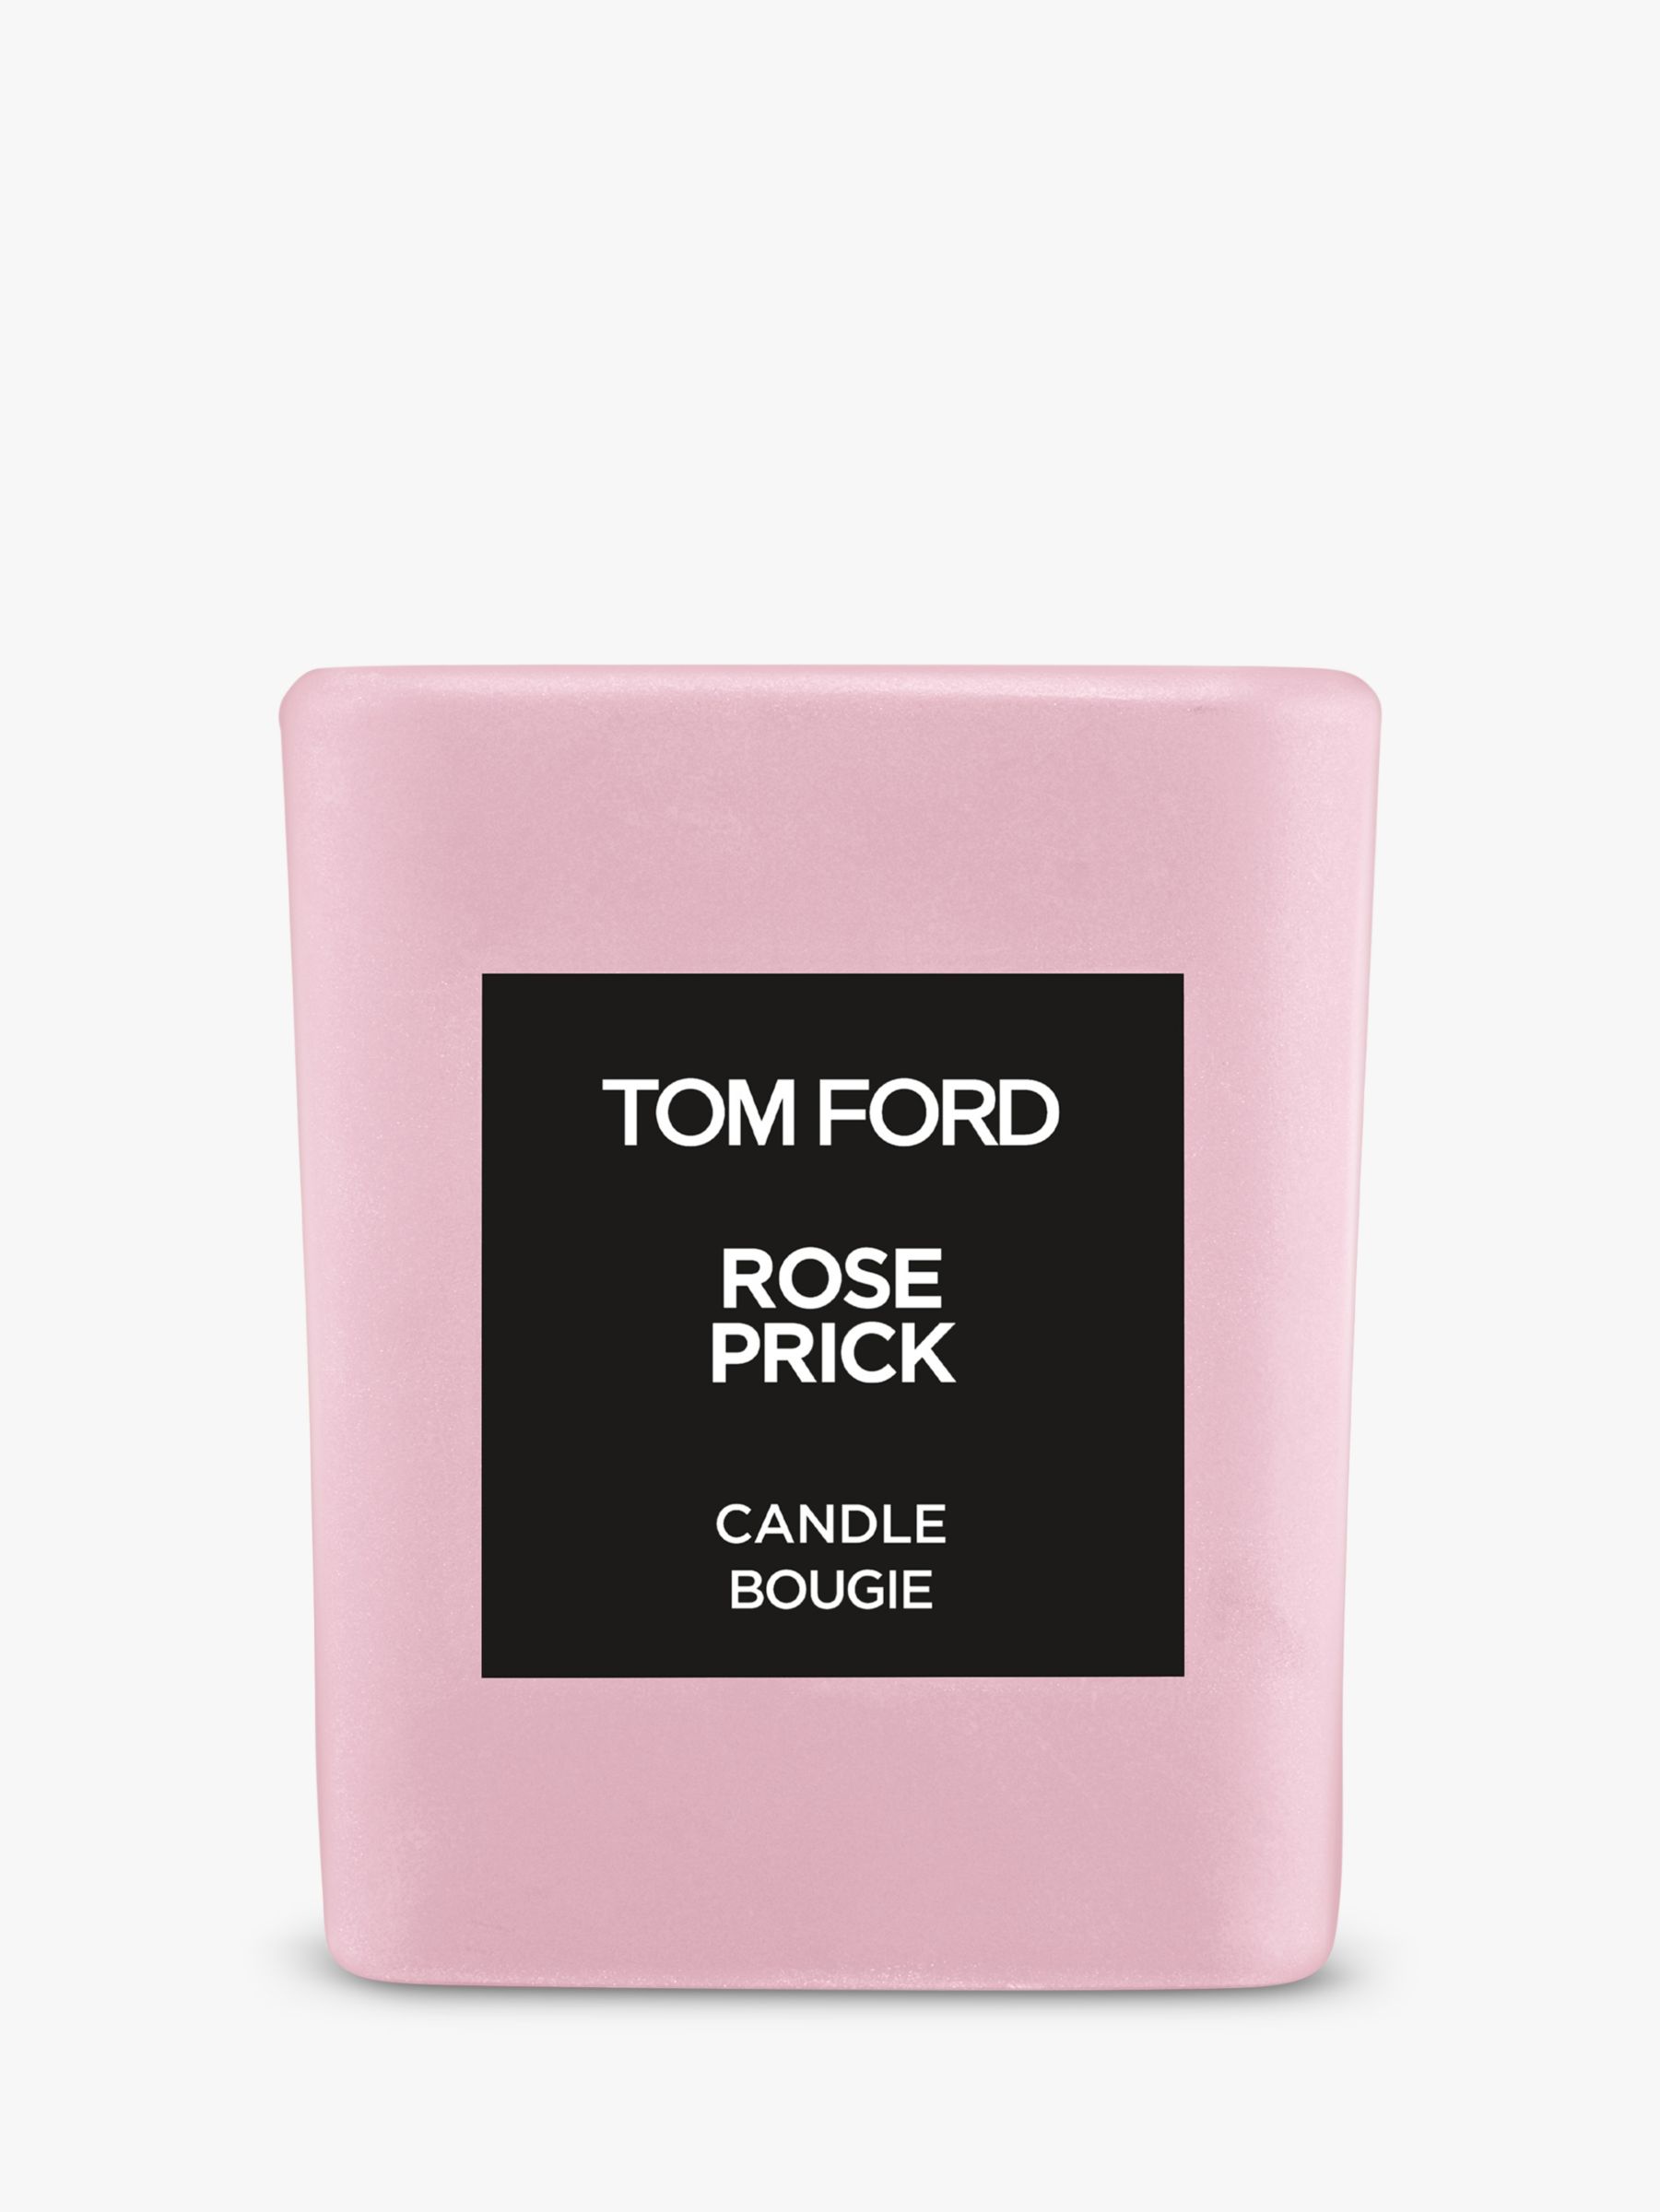 TOM FORD Candles | John Lewis & Partners